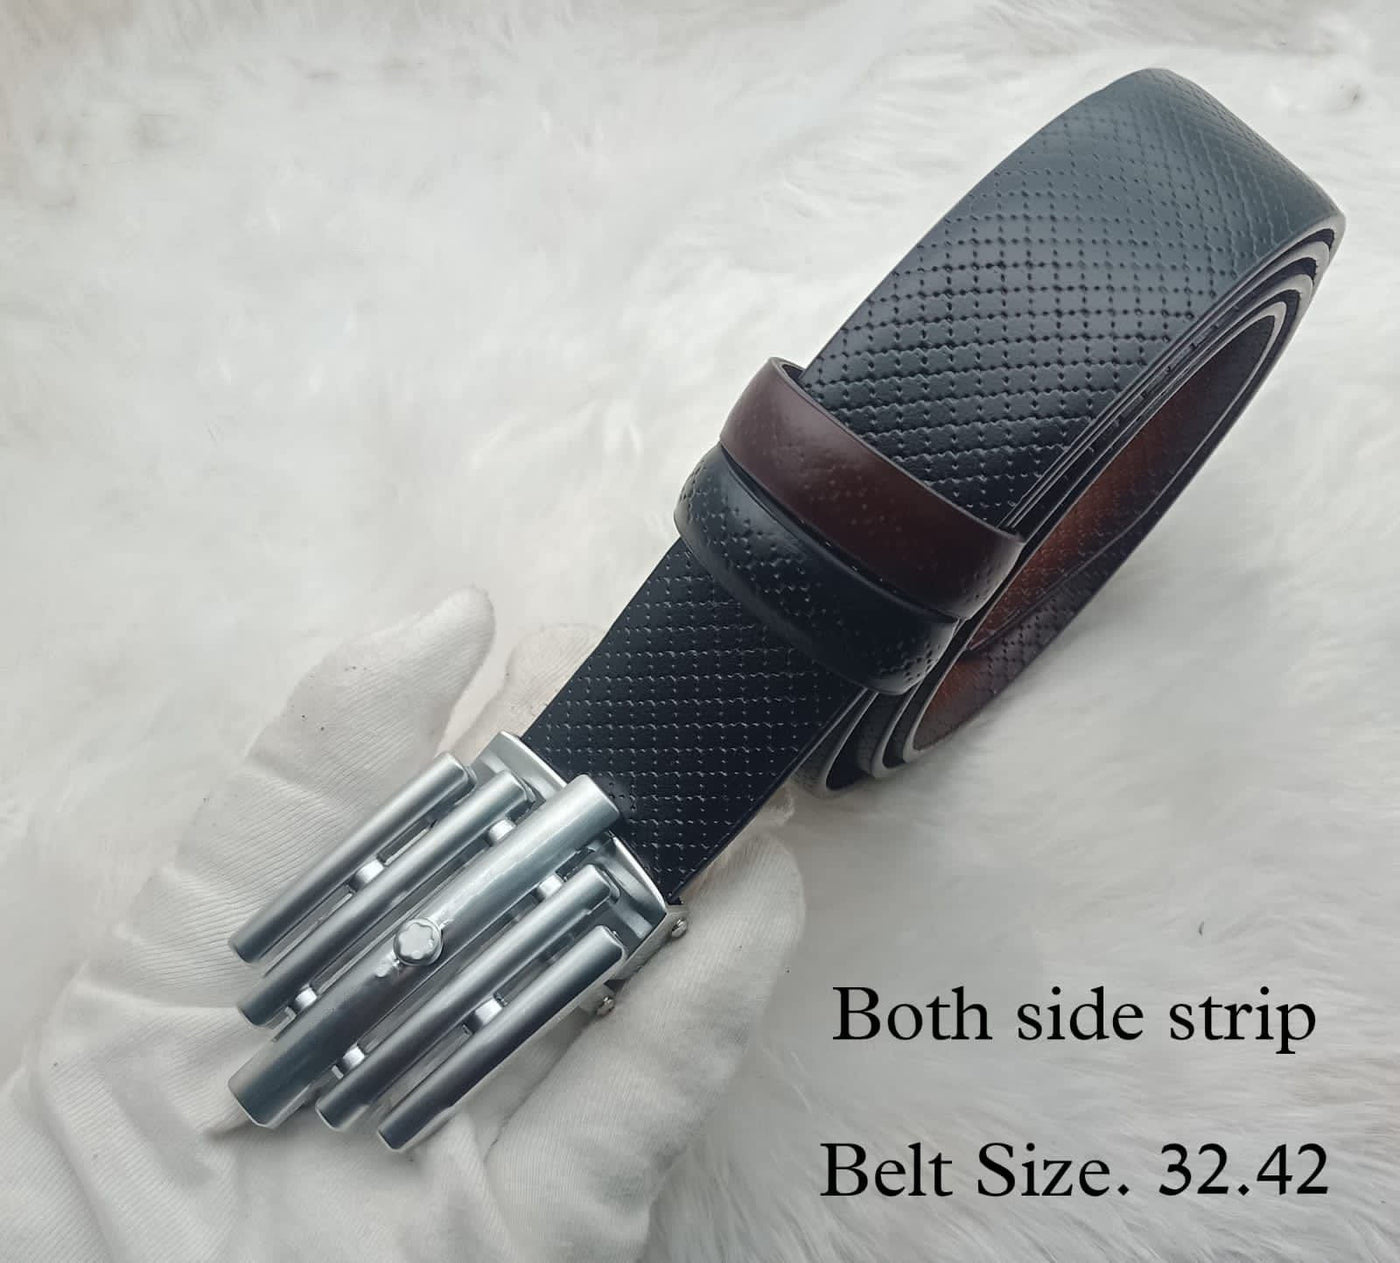 New Stylish Reversible Strap Belt For Men's-Unique and Classy